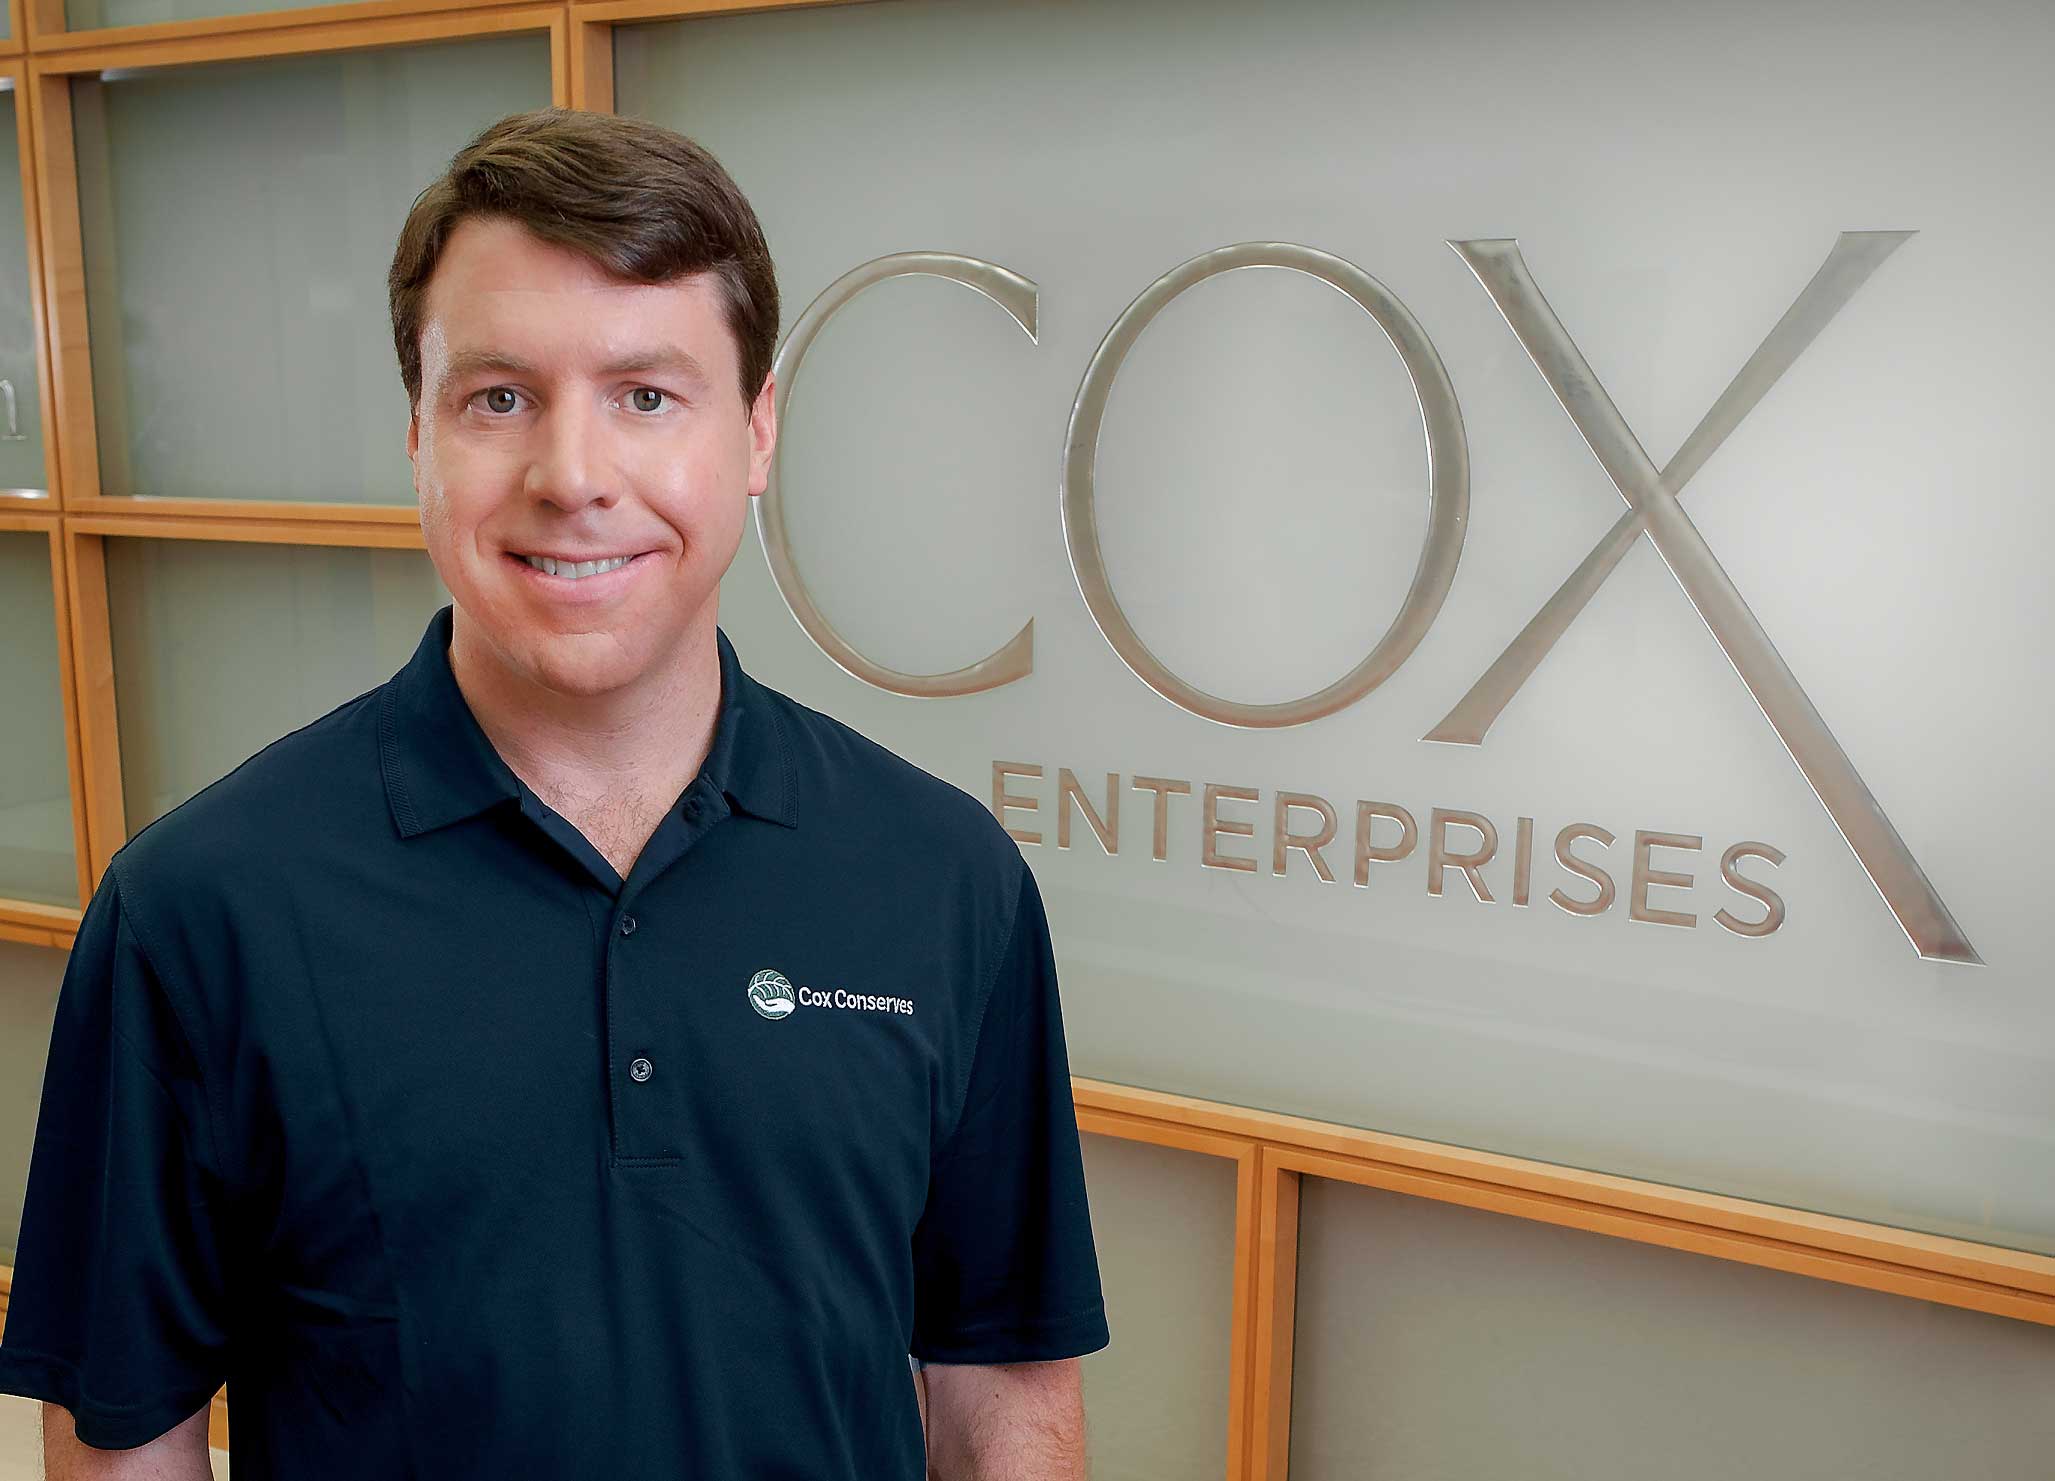 The Cox Conserves Sustainability Survey, commissioned by Cox Enterprises, is a national study that examines sustainability opportunities and challenges for small and medium-sized businesses (SMBs).